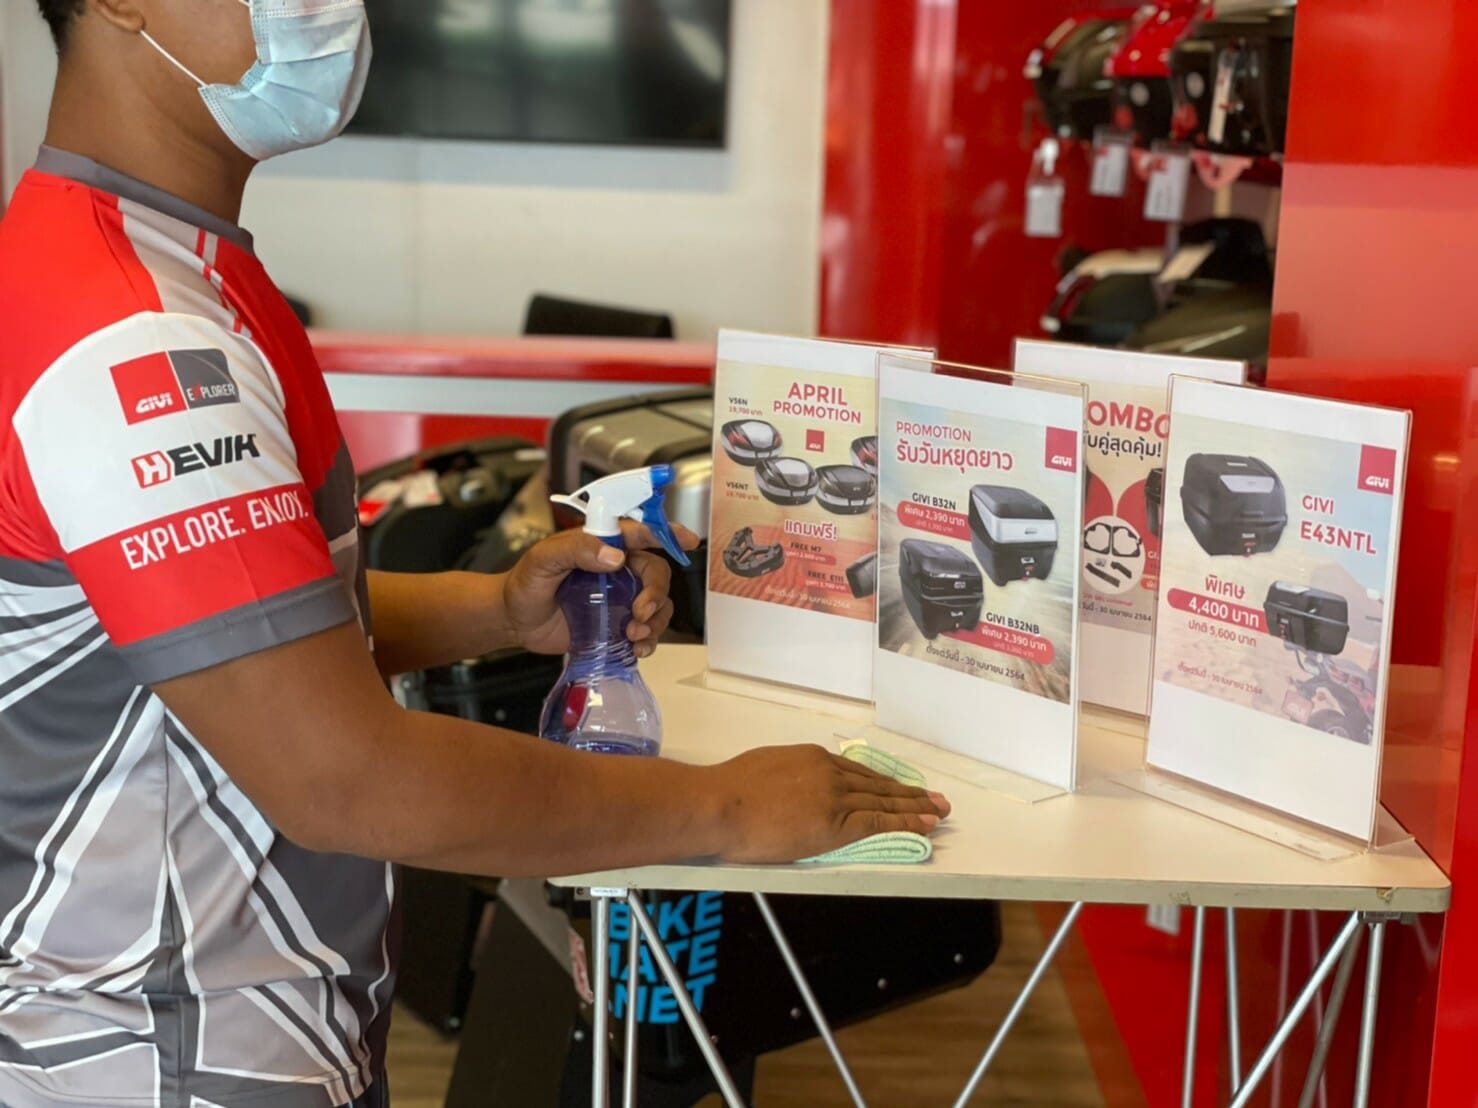 BIKEMATE SHOP GIVI POINT BANGKOK Clean Up for your safety and health